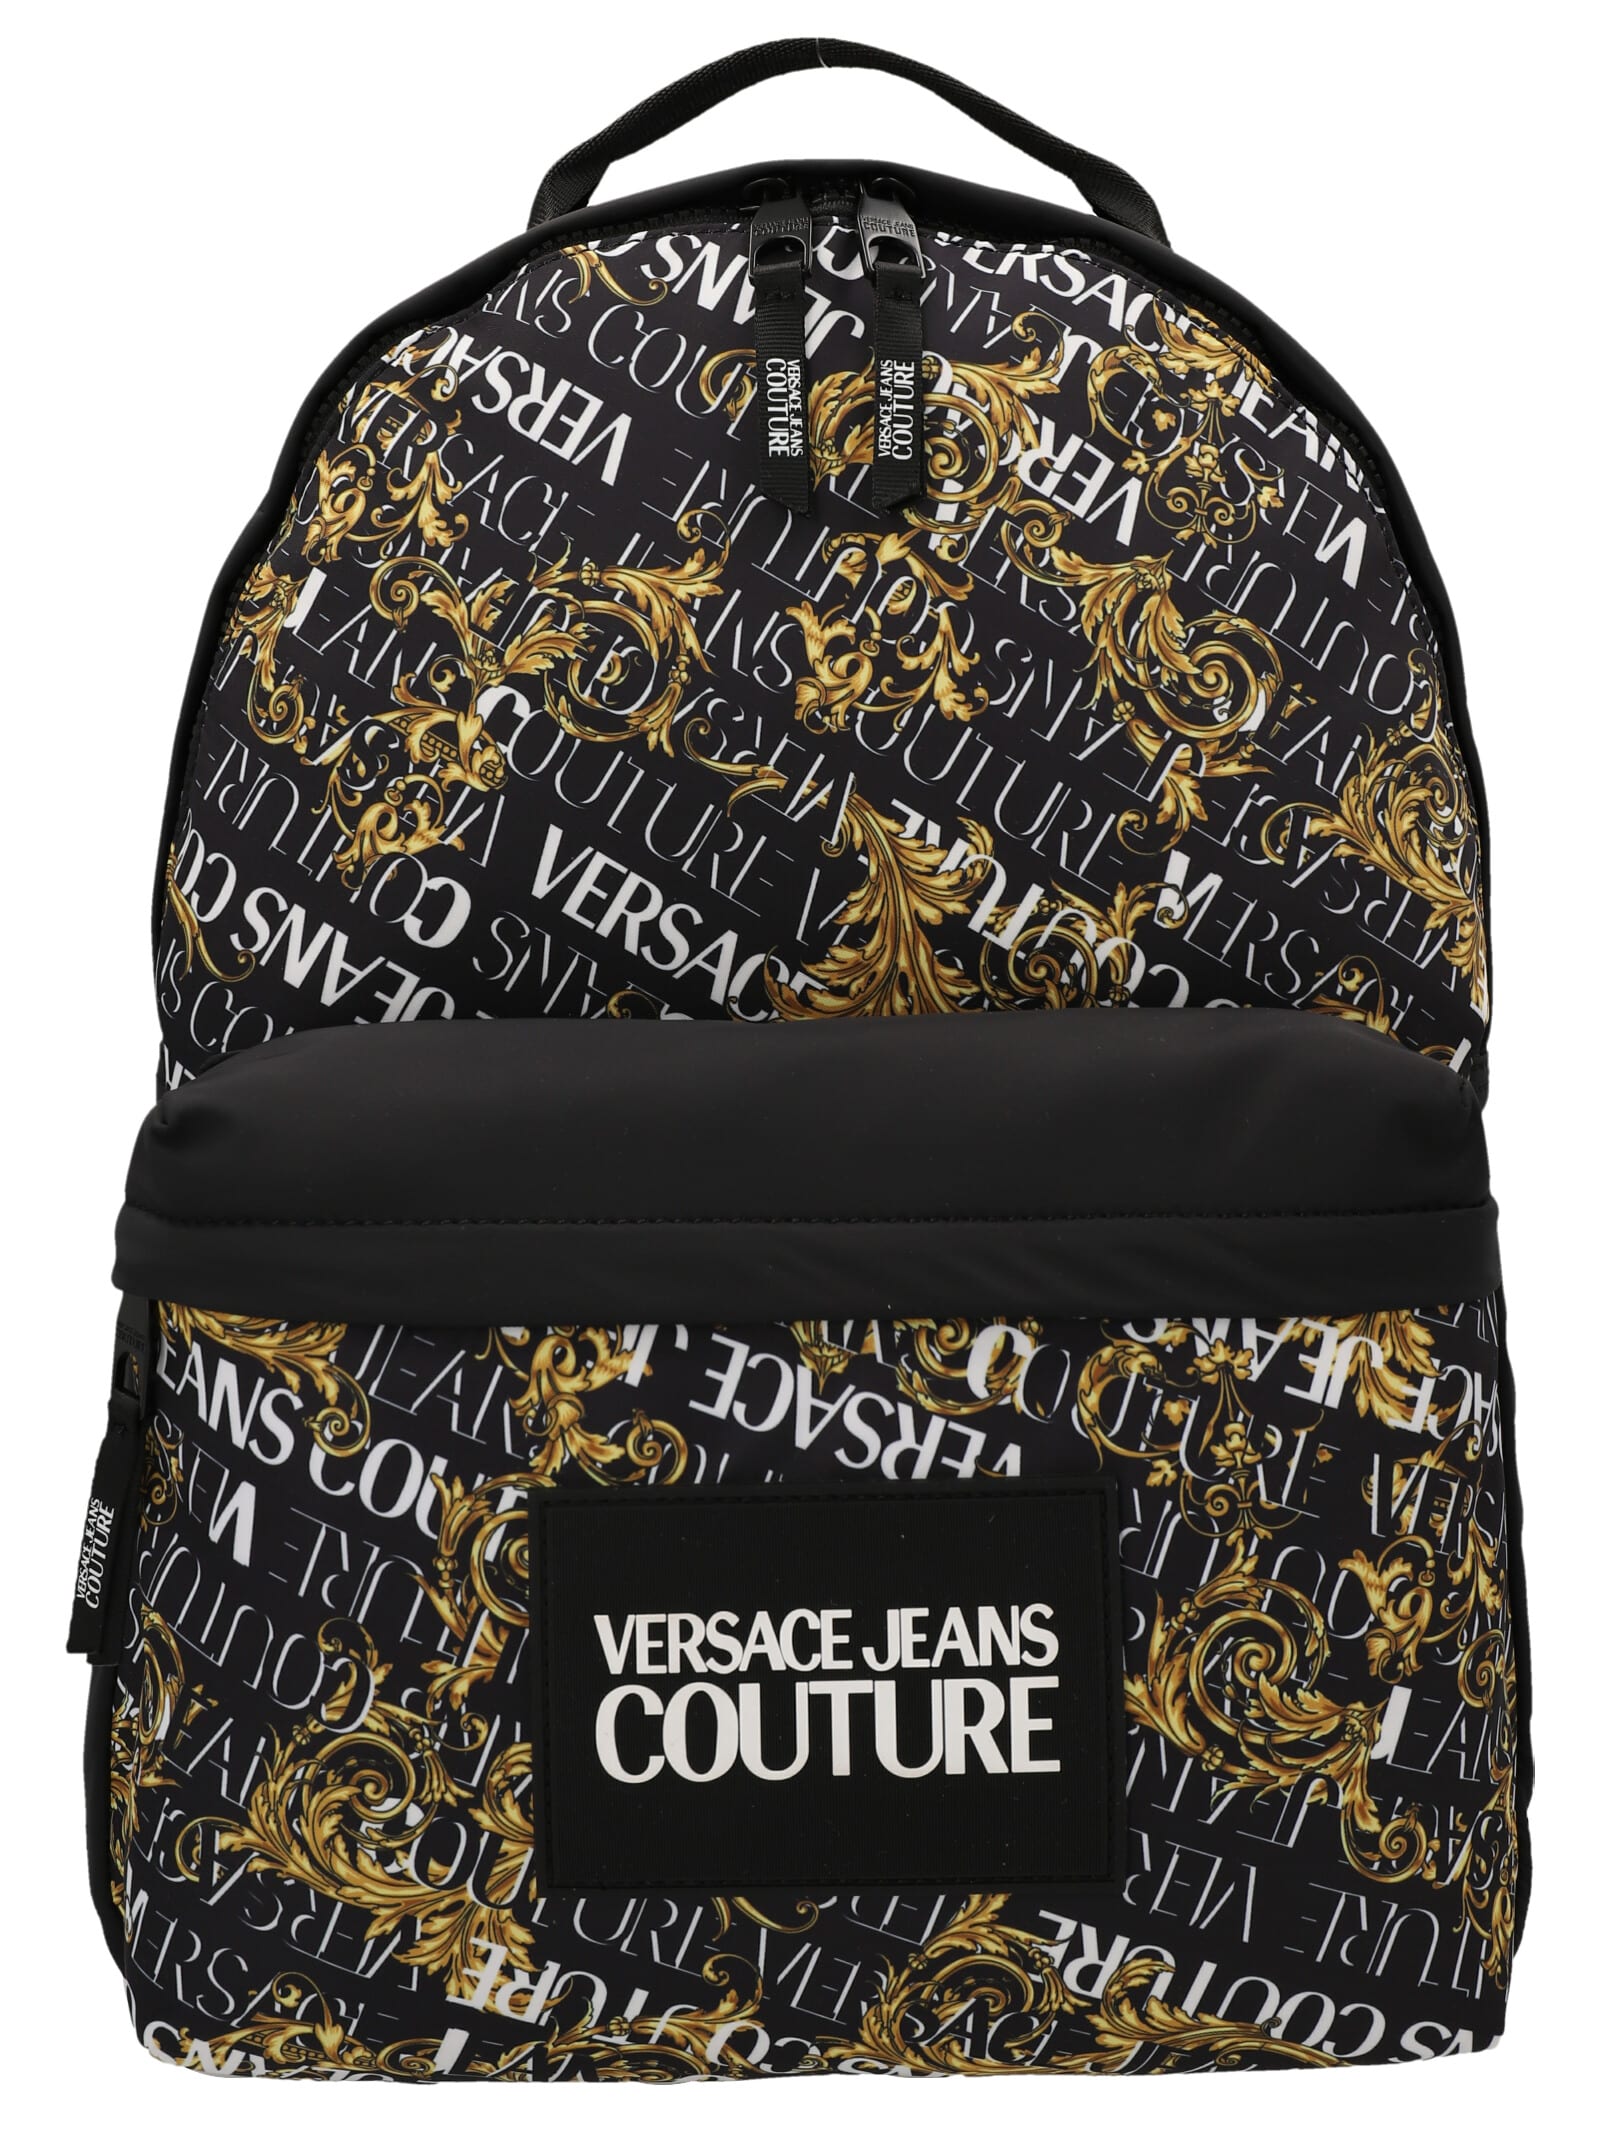 Versace Jeans Couture Logo Nylon Backpack